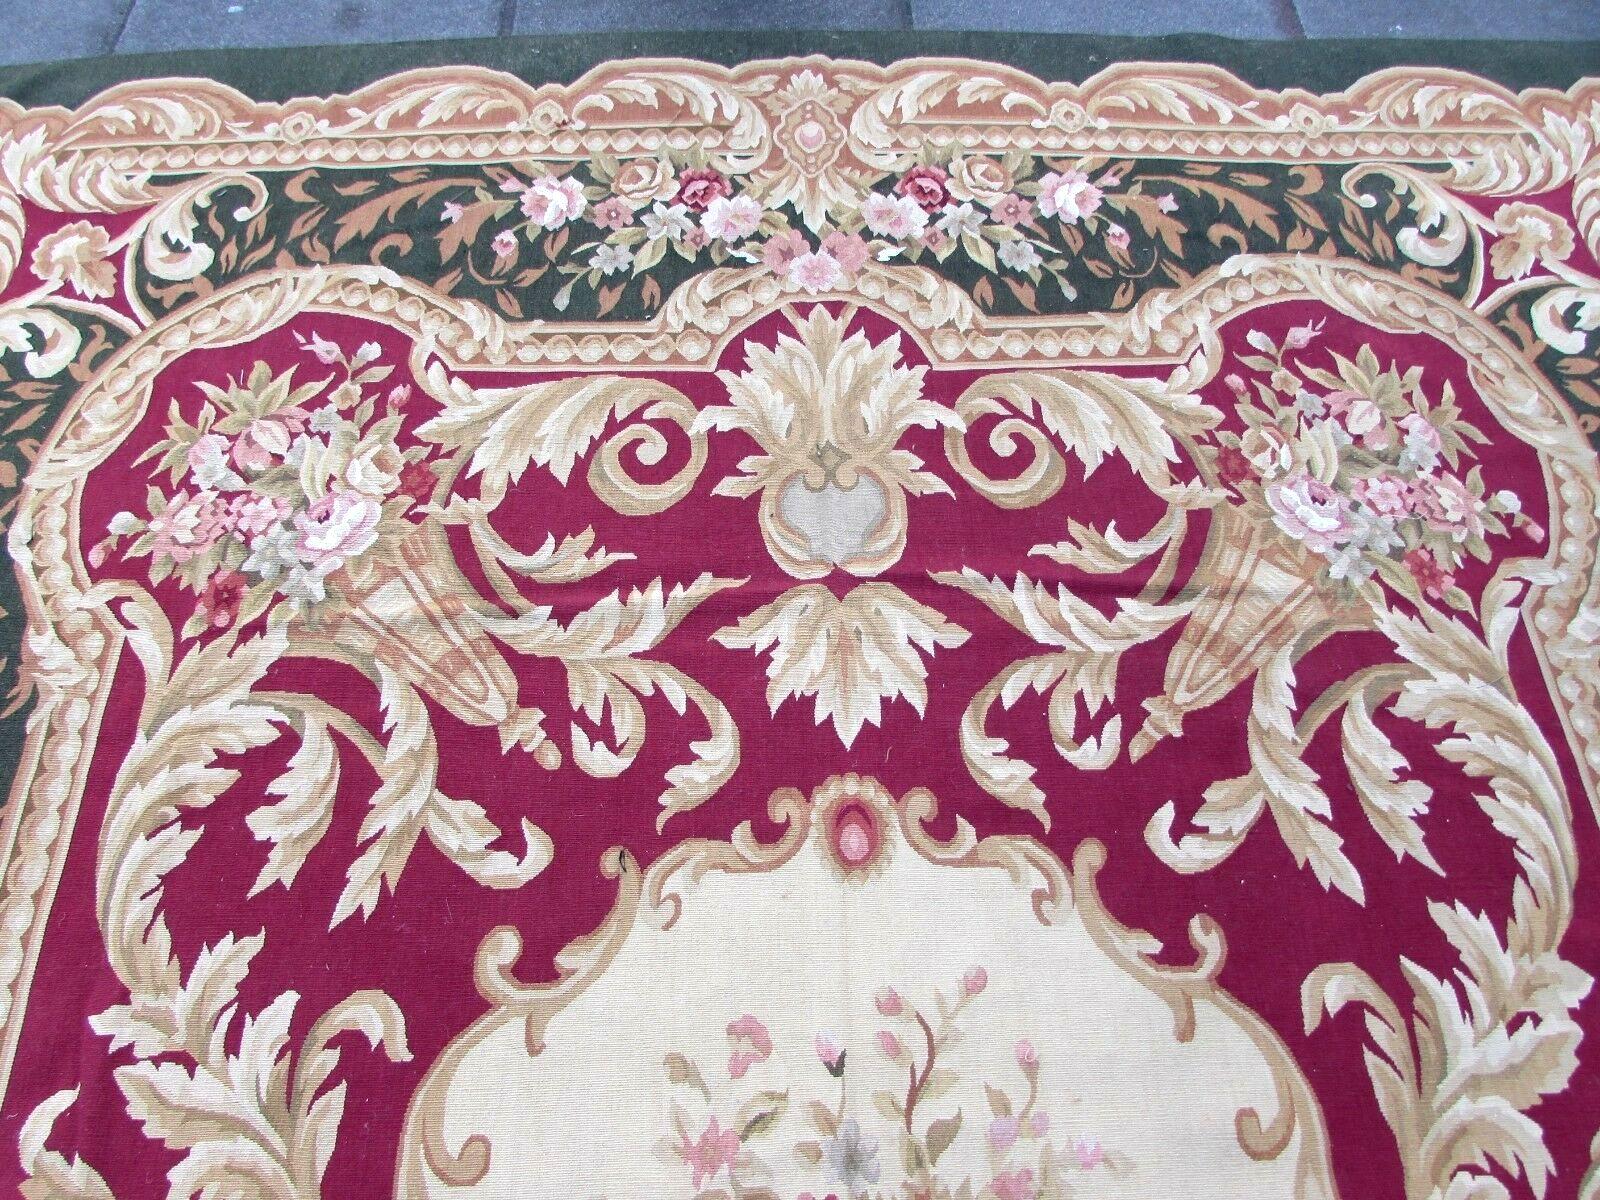 Handmade vintage French Aubusson rug in wool. This rug has been made in the end of 20th century, it is in original good condition.

-condition: original good,

-circa 1970s,

-size: 9' x 13' (270cm x 389cm),

-material: wool,

-country of